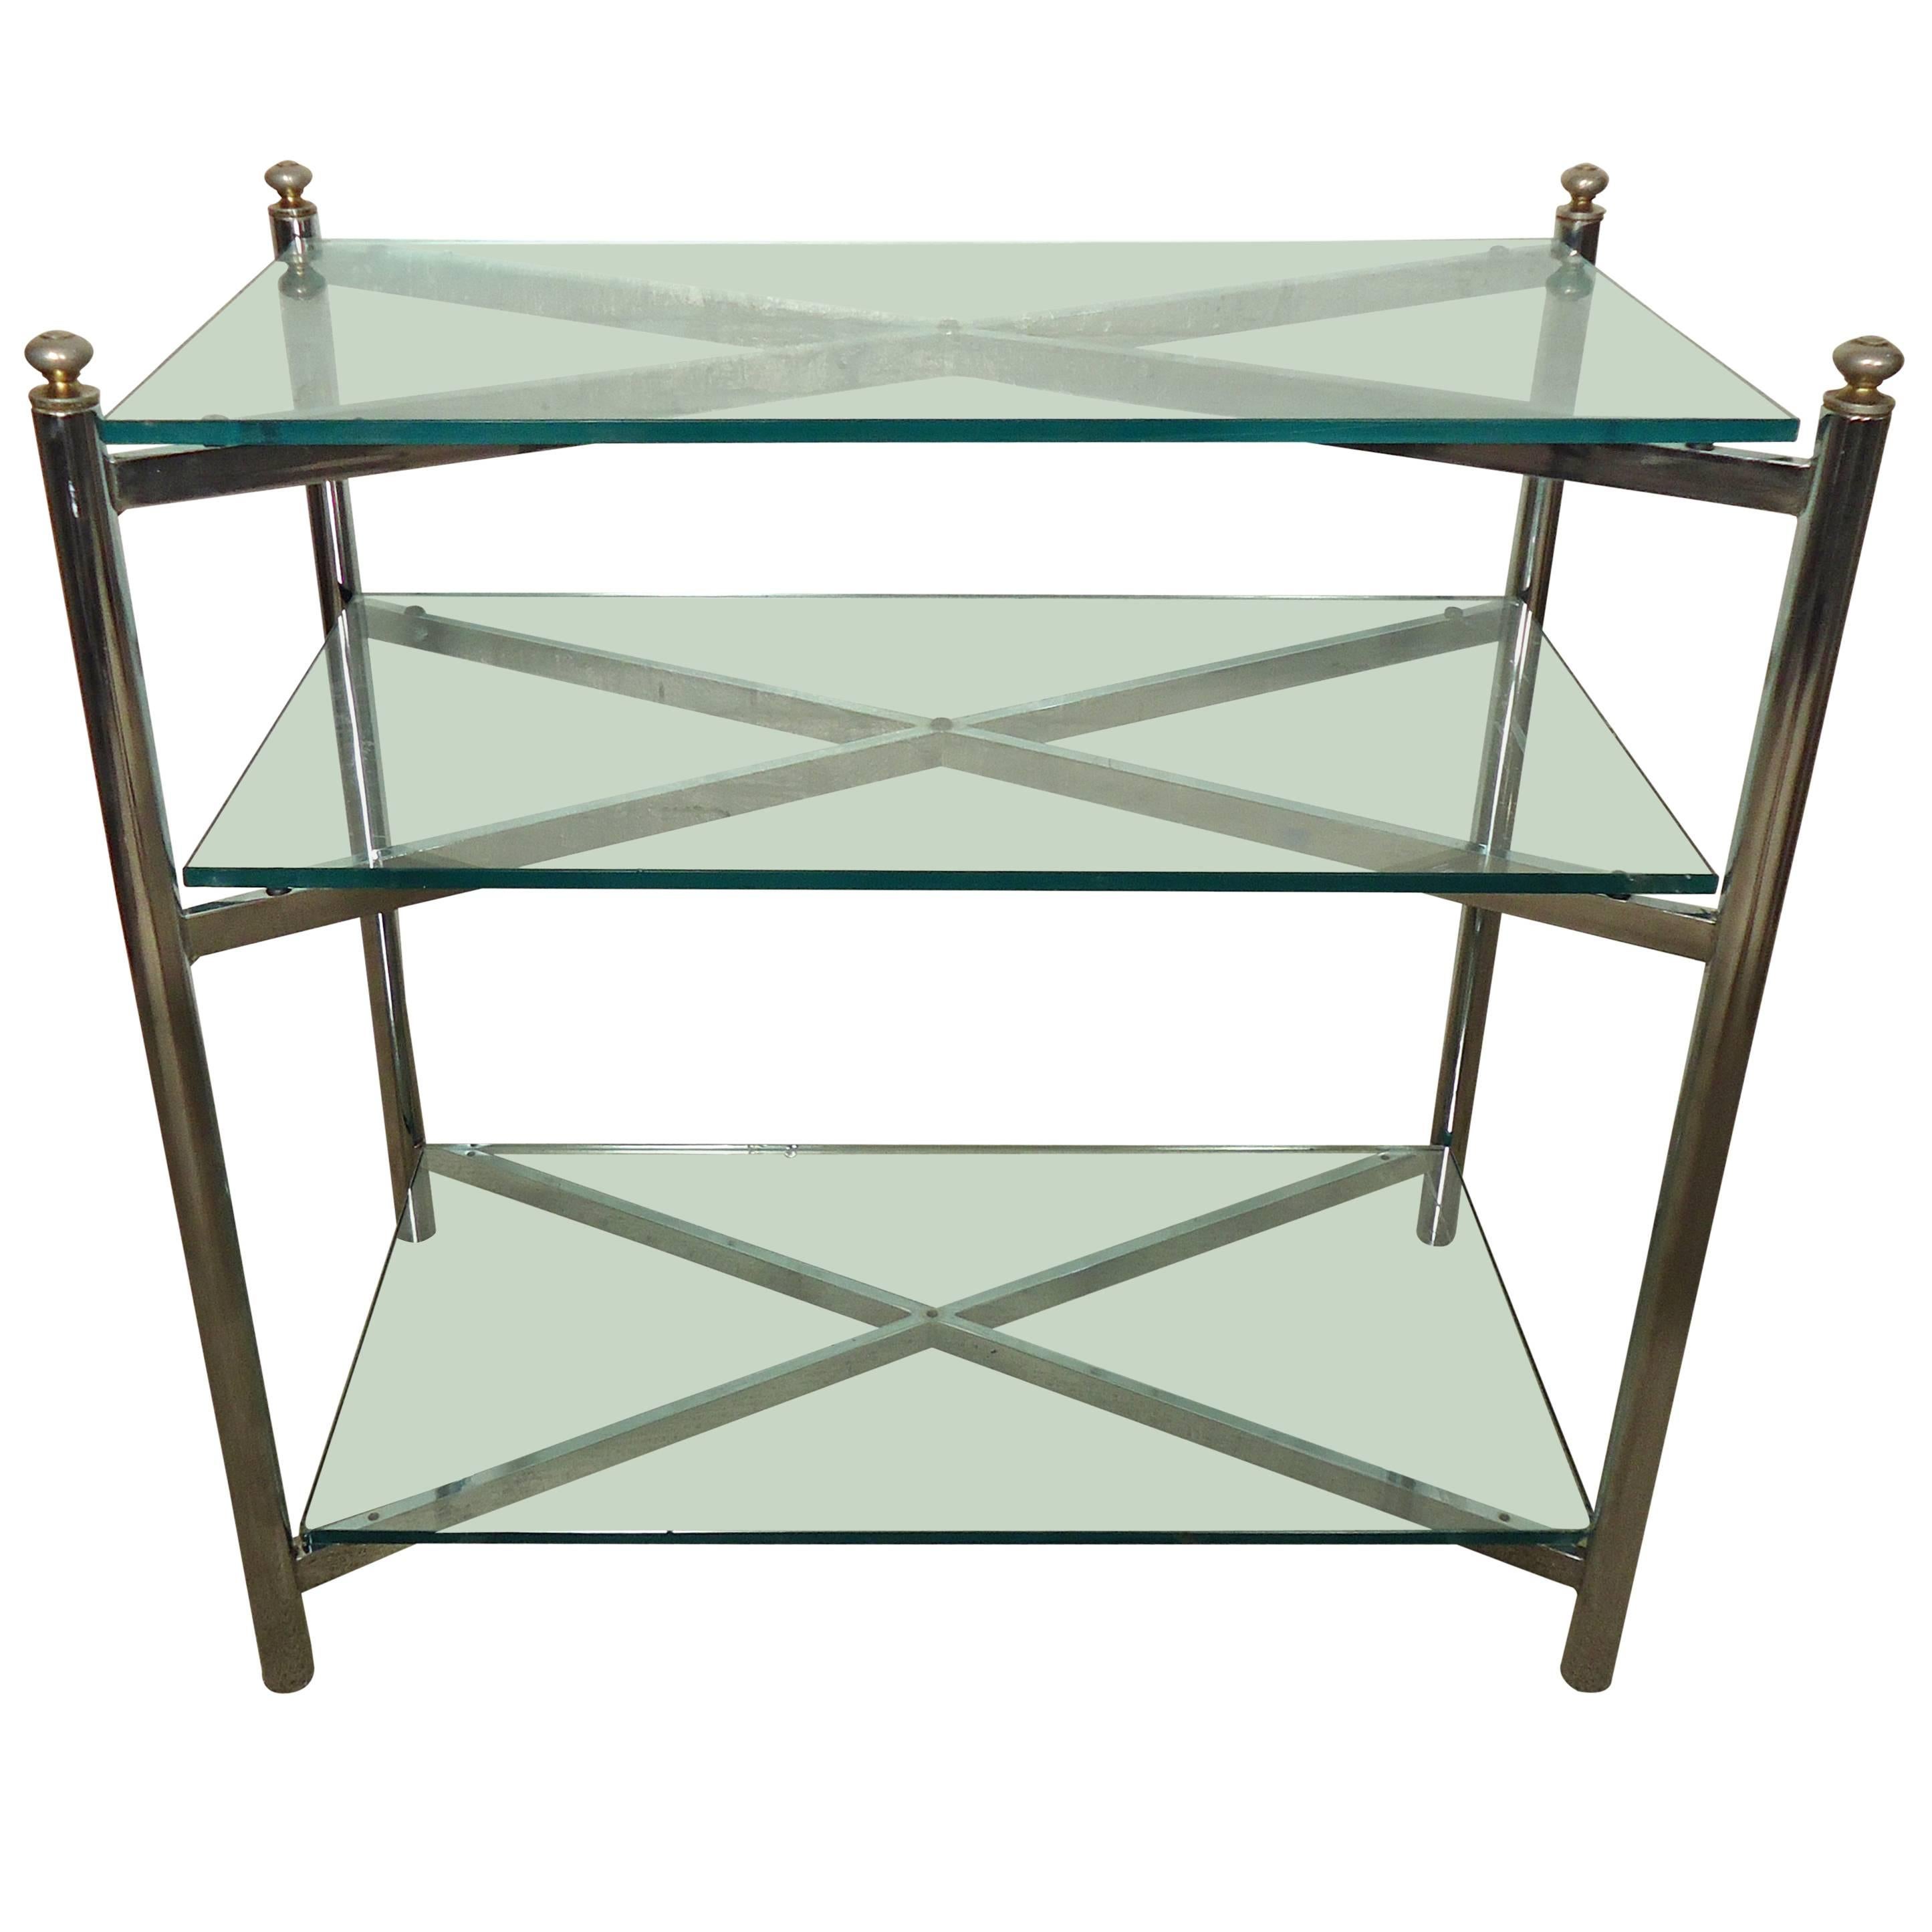 Midcentury Chrome and Brass Console Table